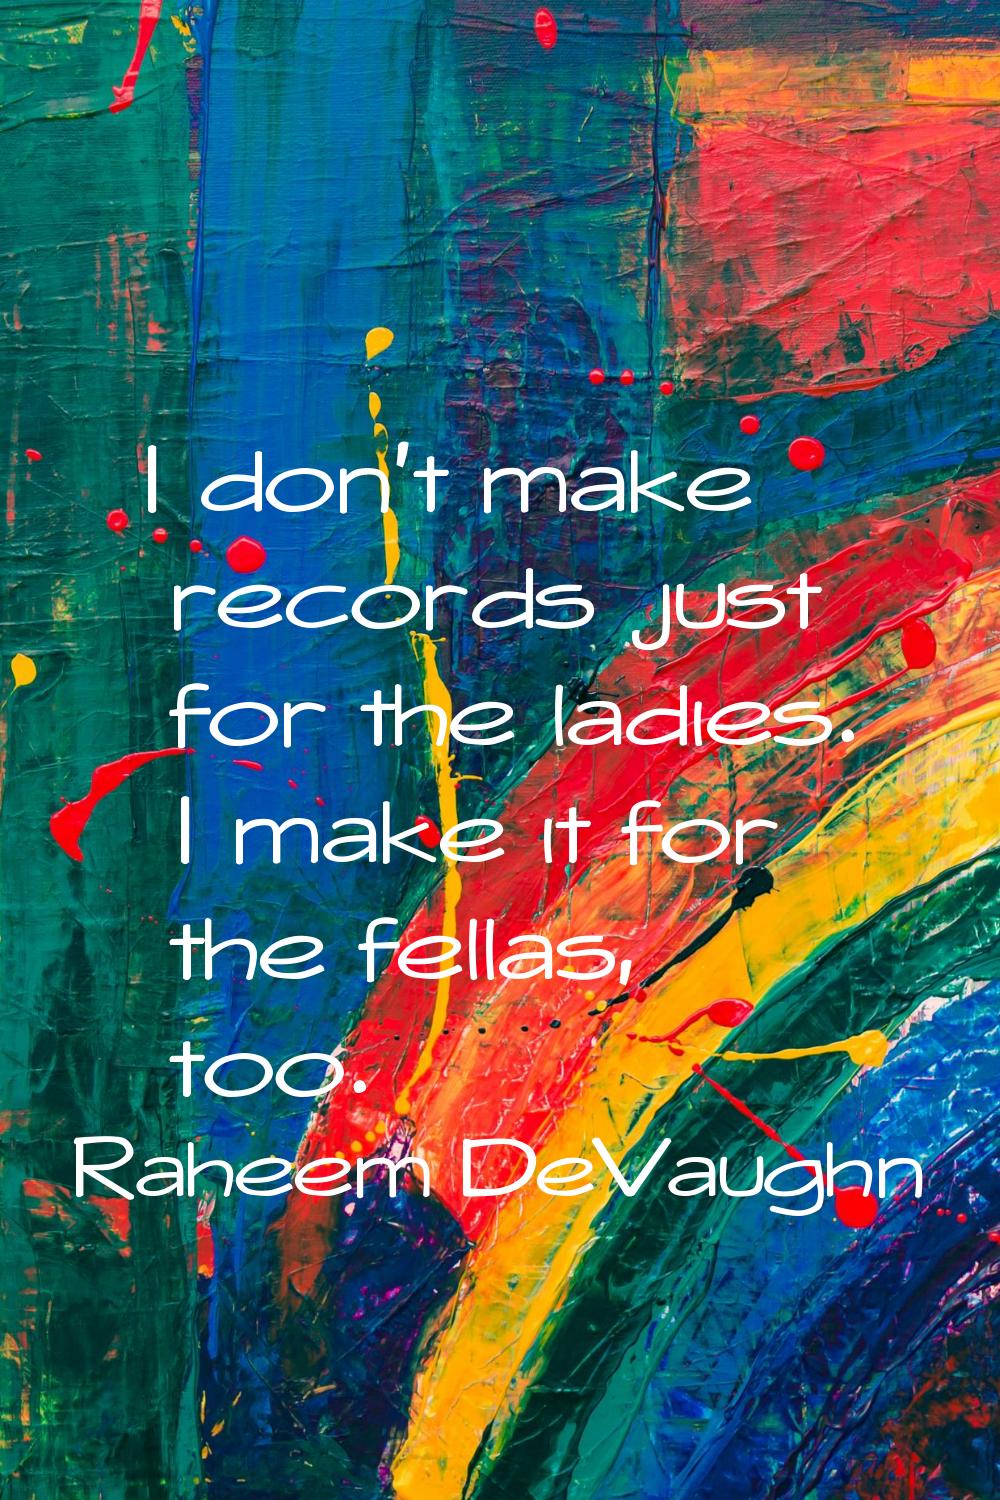 I don't make records just for the ladies. I make it for the fellas, too.